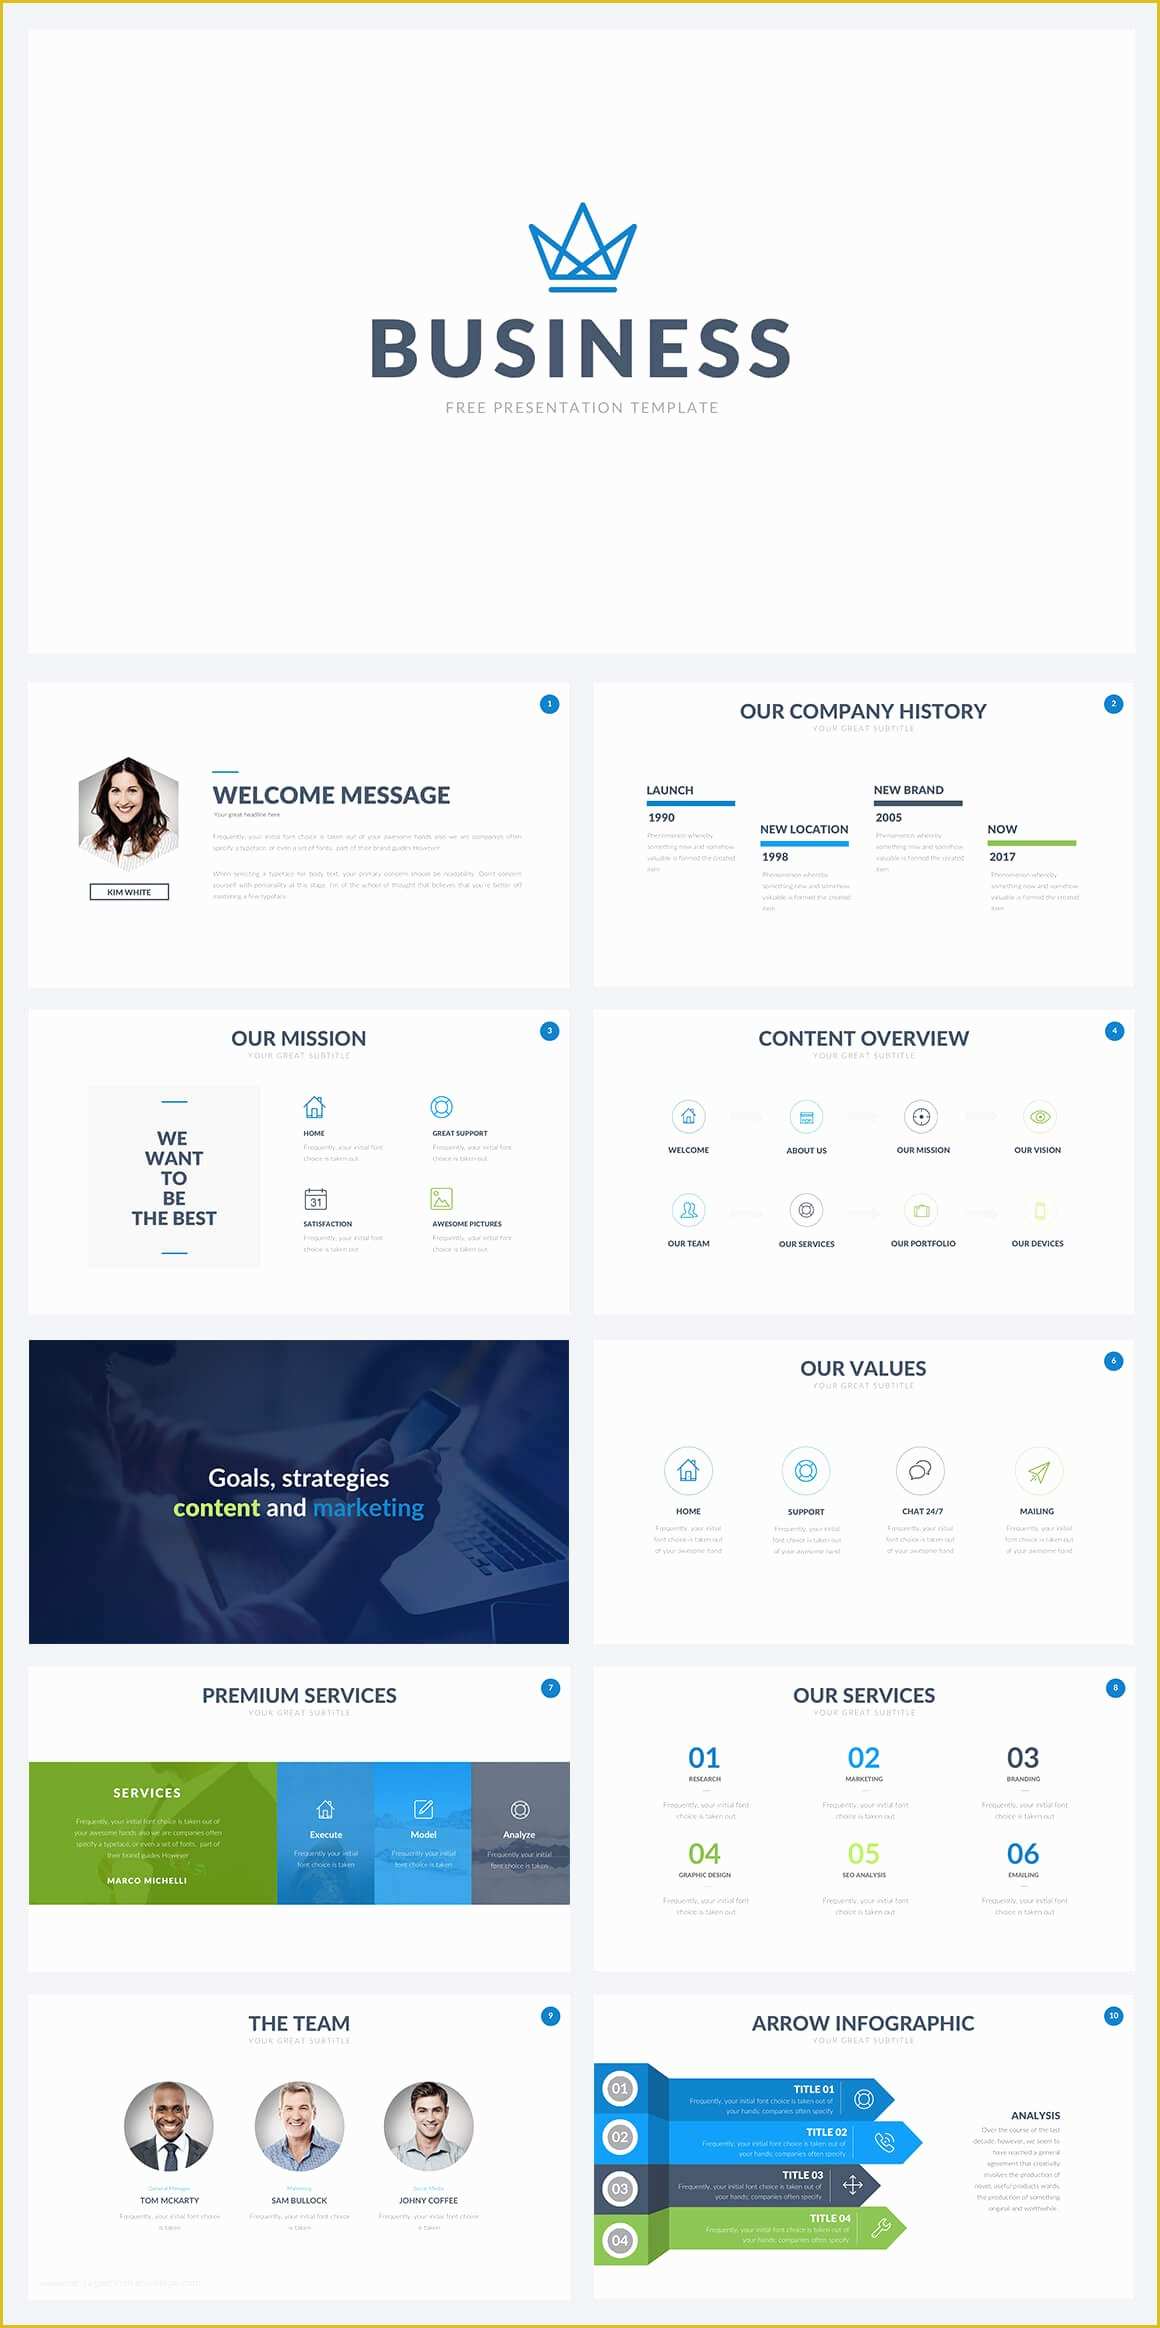 Free Business Powerpoint Templates Of 50 Best Free Cool Powerpoint Templates Of 2018 Updated